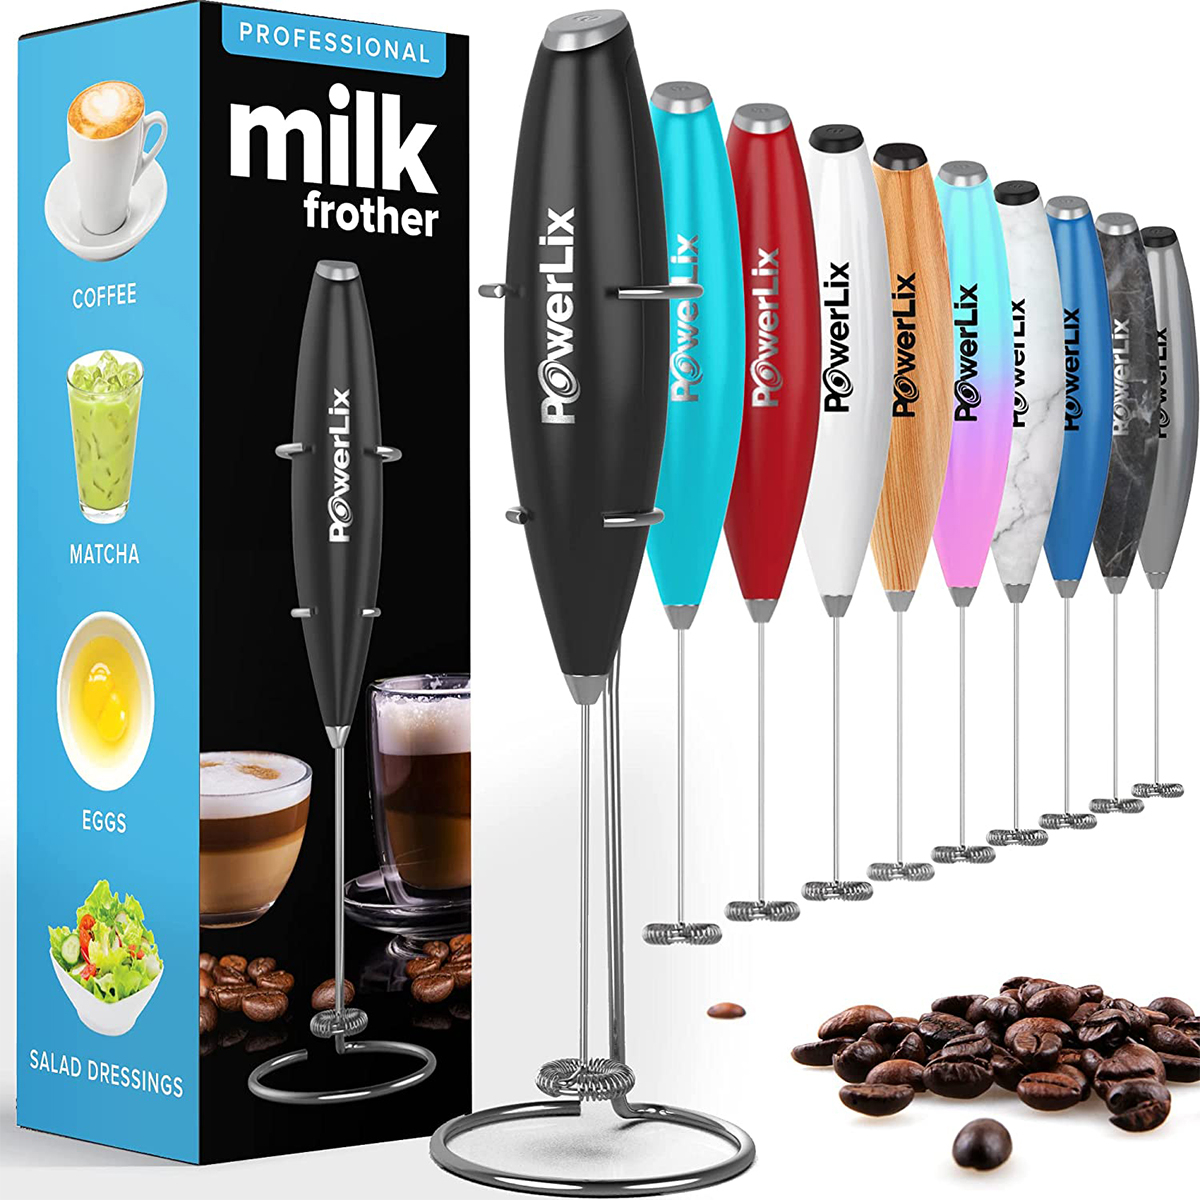 I tried this $10 milk frother and my morning coffee is 10x better